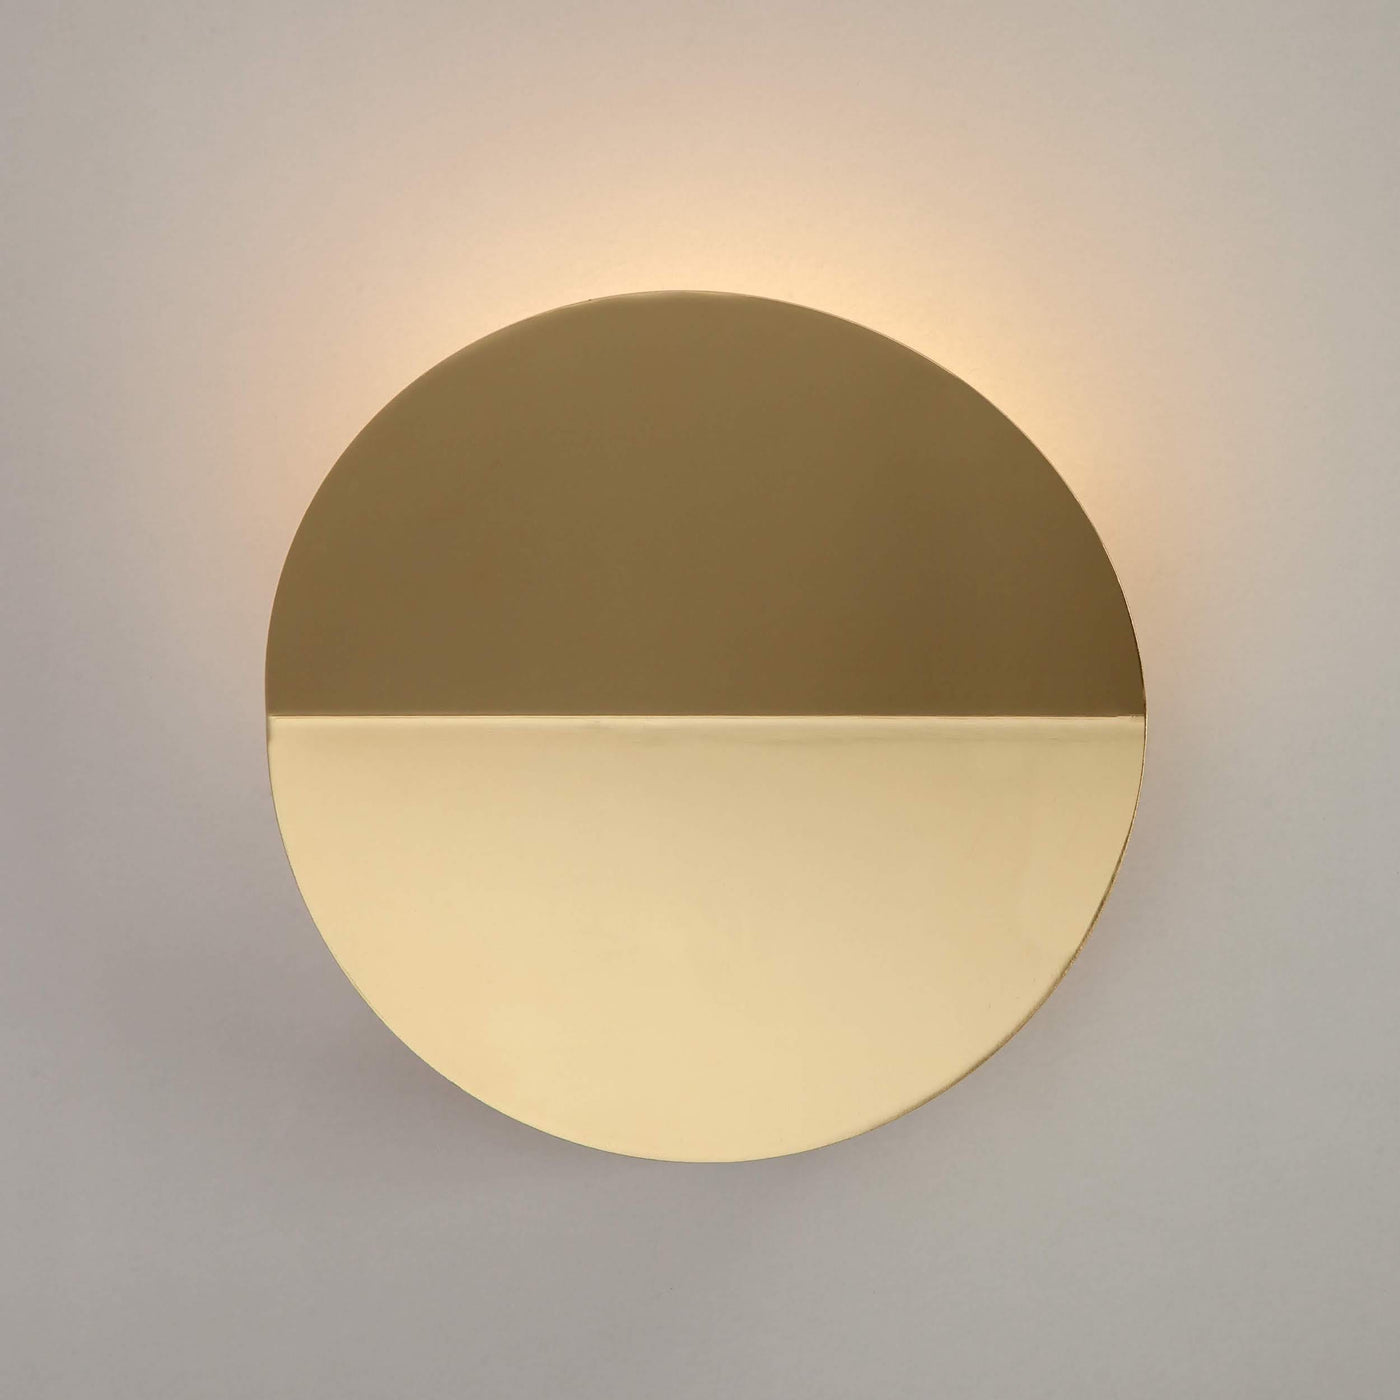 Houseof Diffuser Wall Light. British design at someday designs. #colour_brass